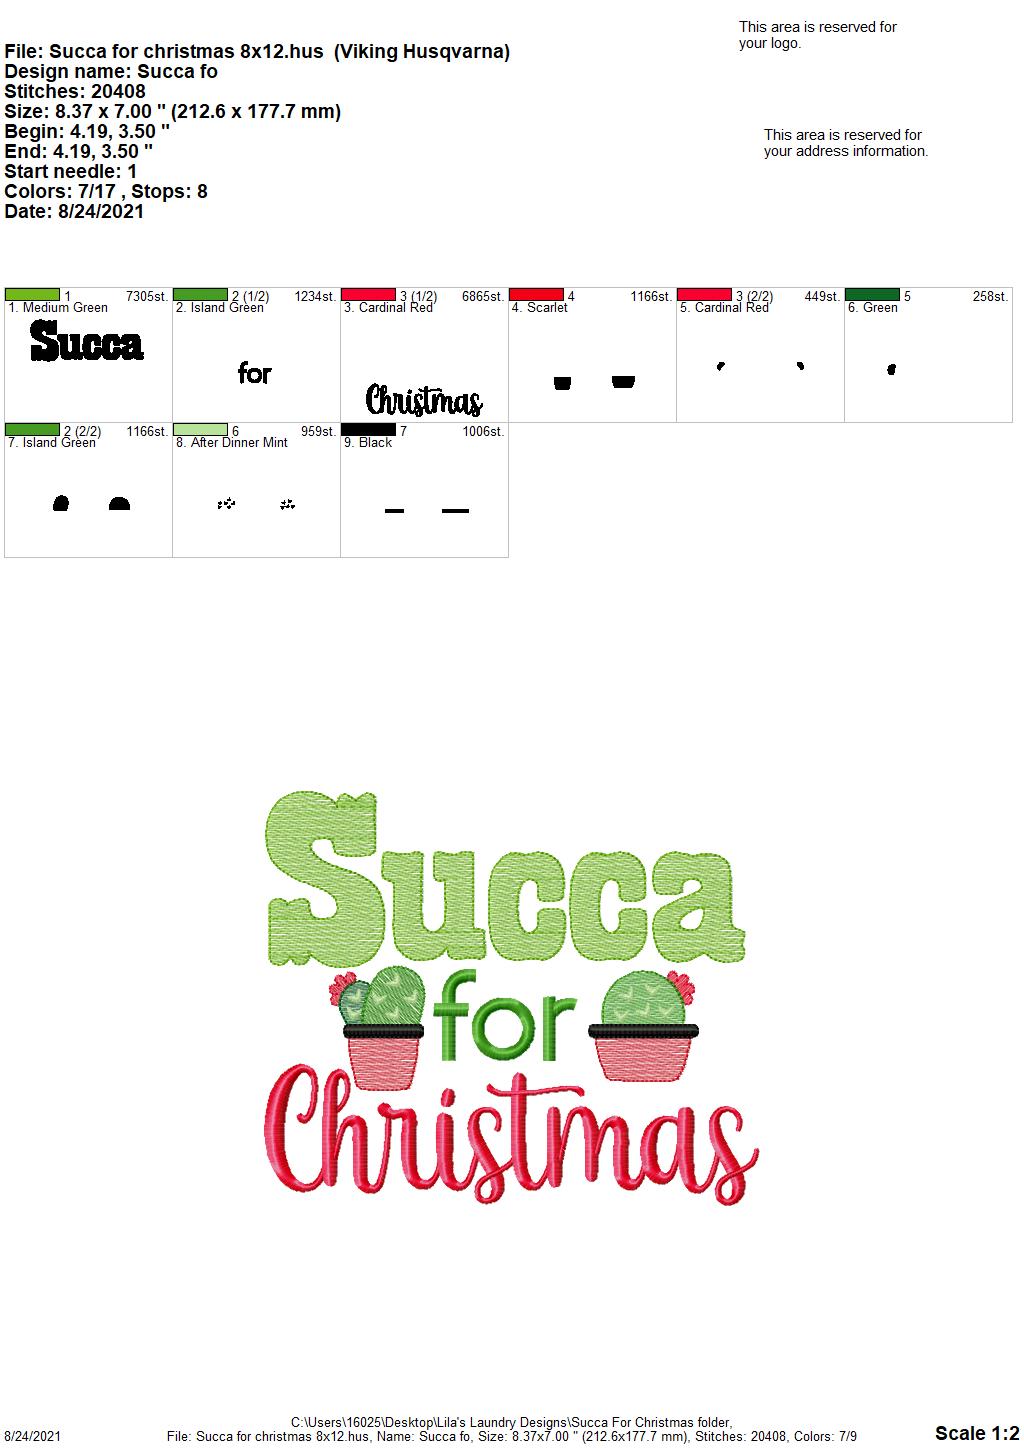 Succa for Christmas - 3 sizes- Digital Embroidery Design